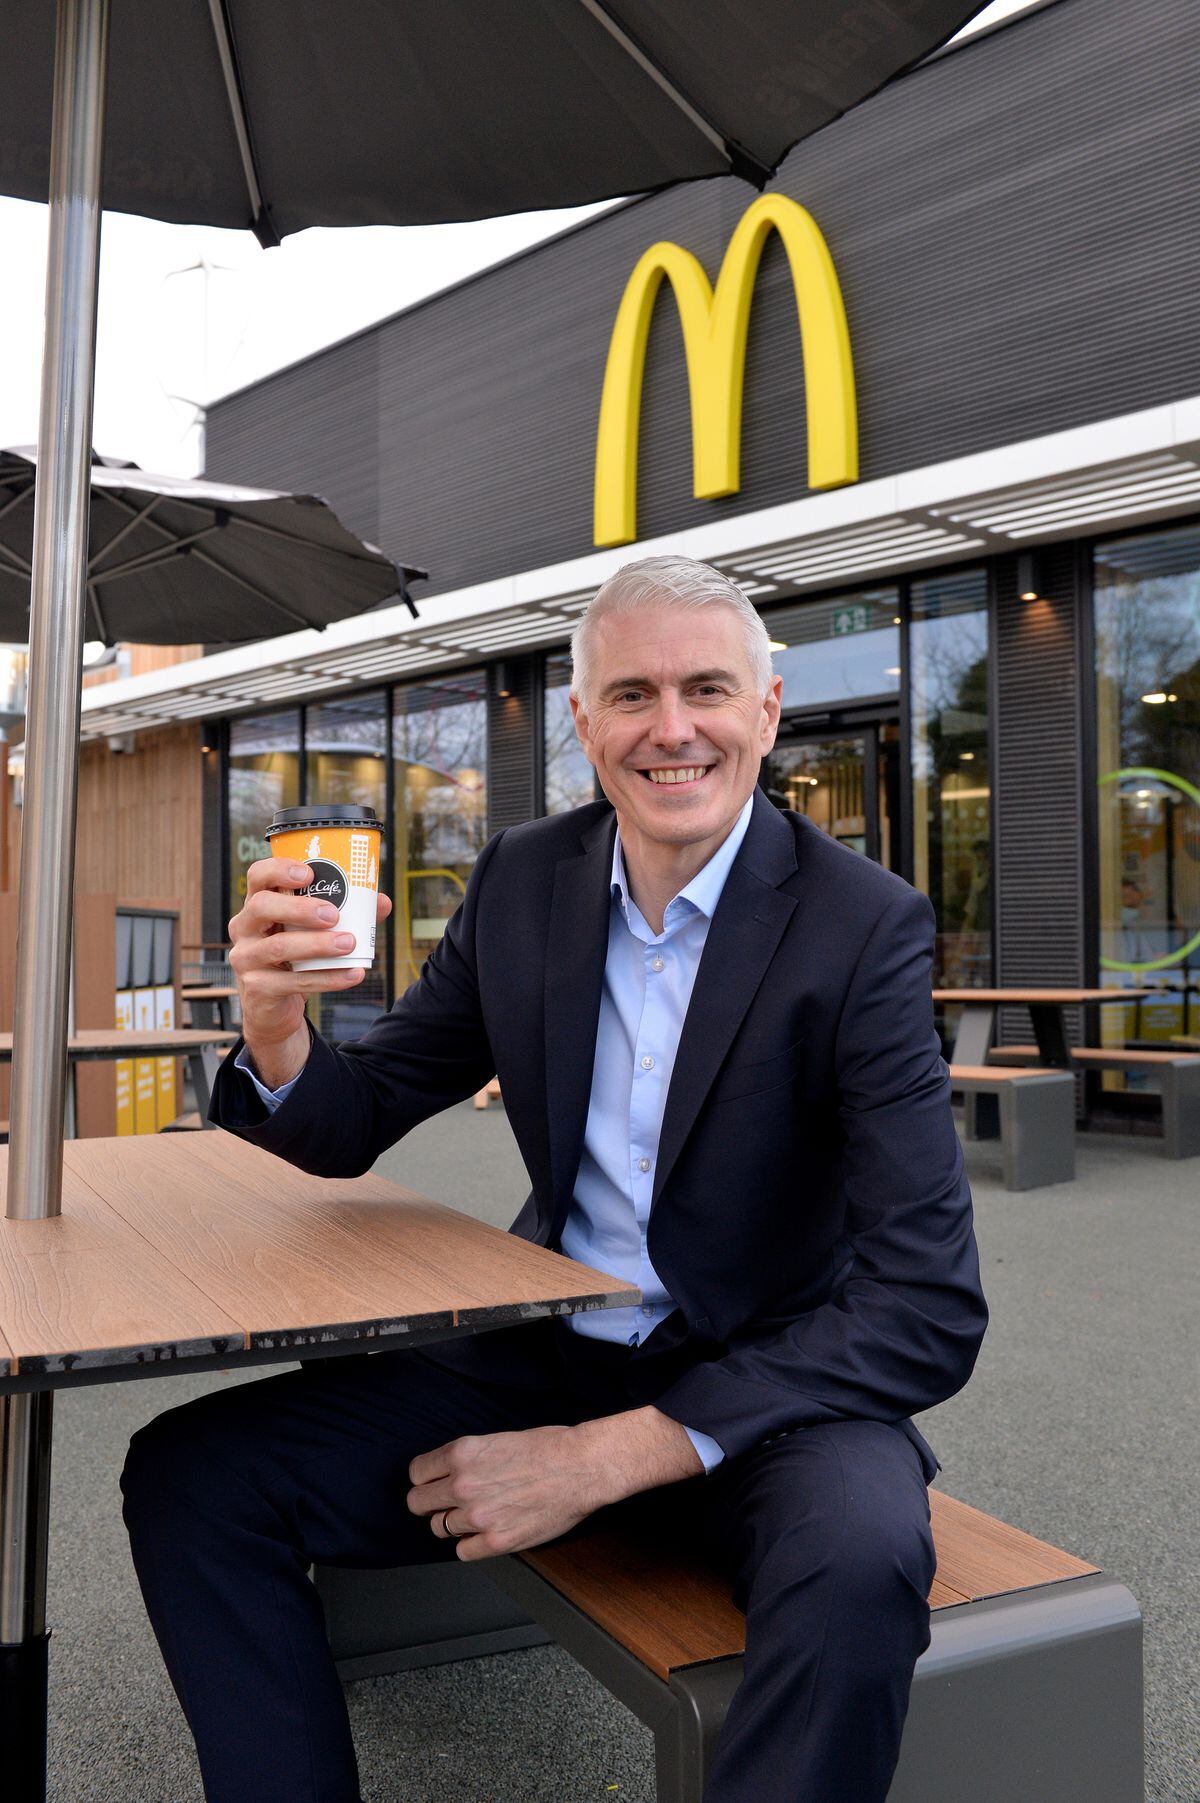 McDonald's franchisee Matthew Winfield ahead of the opening of the new restaurant